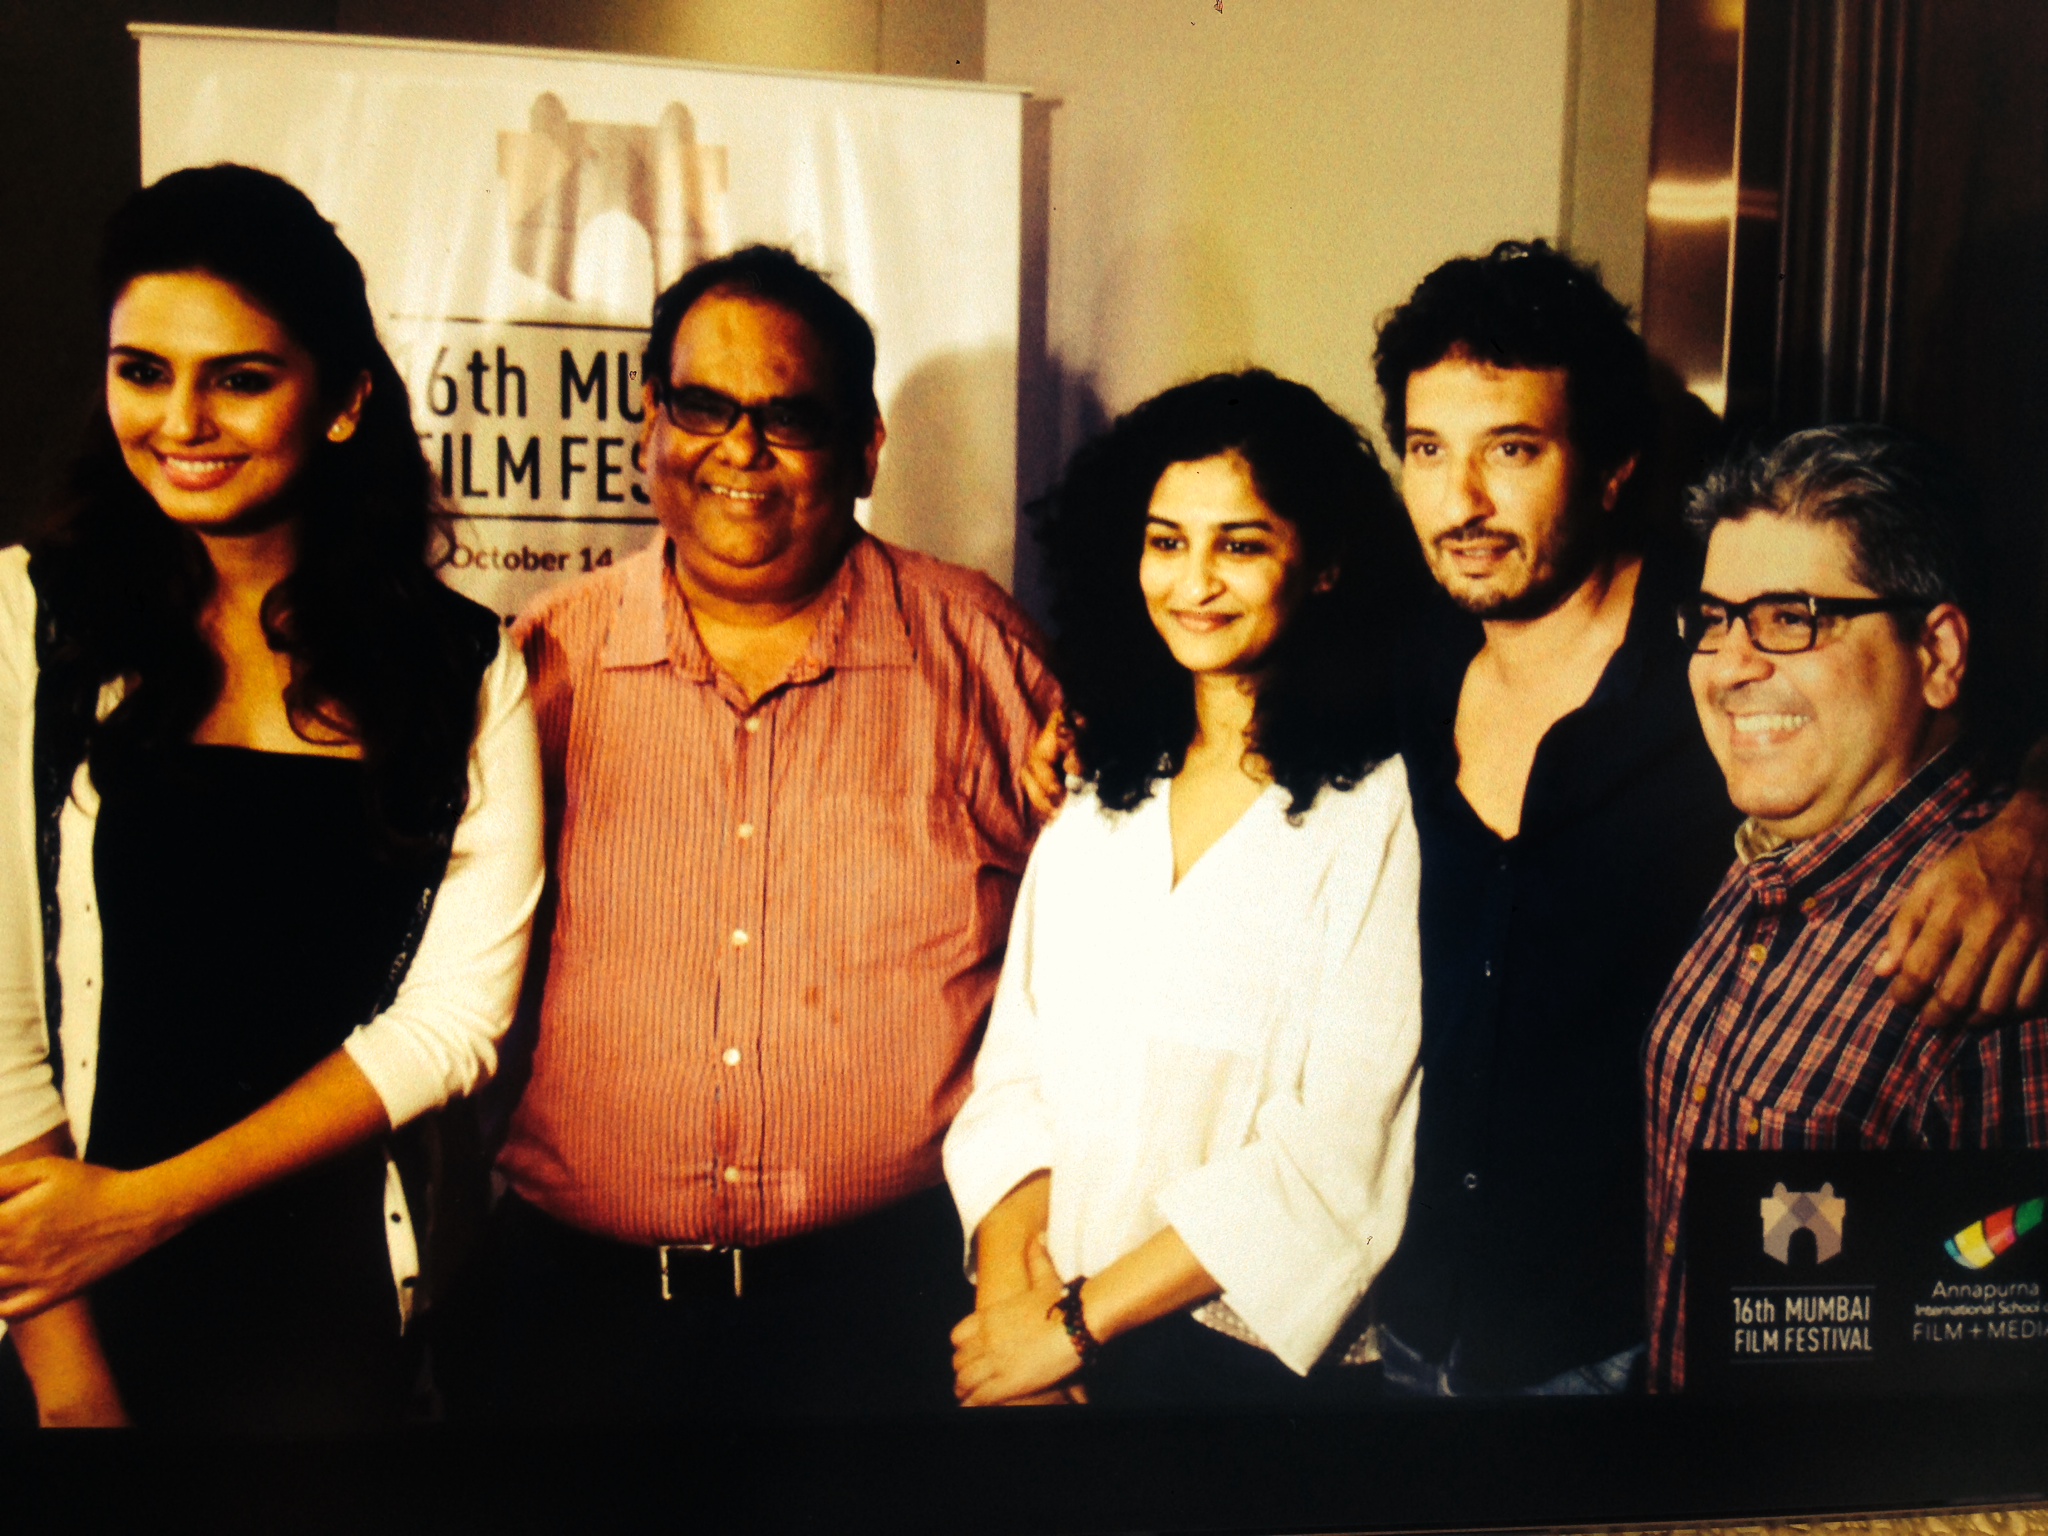 Jury picture of 16th Mumbai Film Festival 2014 for Dimensions a competitive short film section in the festival with Actors Huma quereshi,Jury president Satish Kaushik,Film maker Gauri Shinde,Film maker Homi Adajania and well known film critic Rajeev M